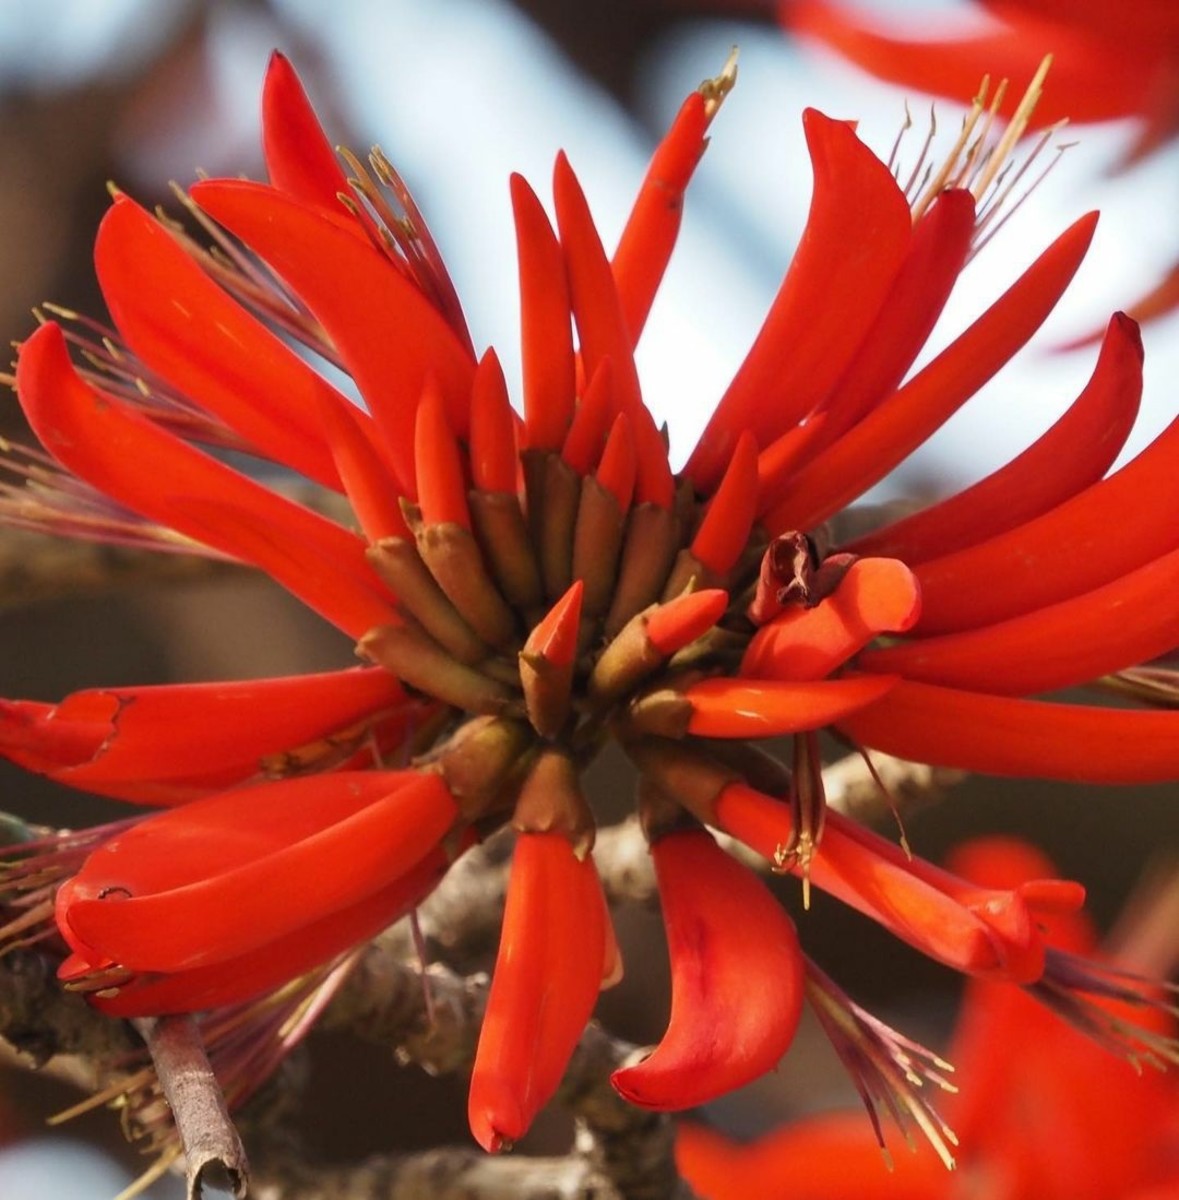 How Does The Delonix Regia Or Royal Poinciana Tree Represent Cultural Significance Hubpages